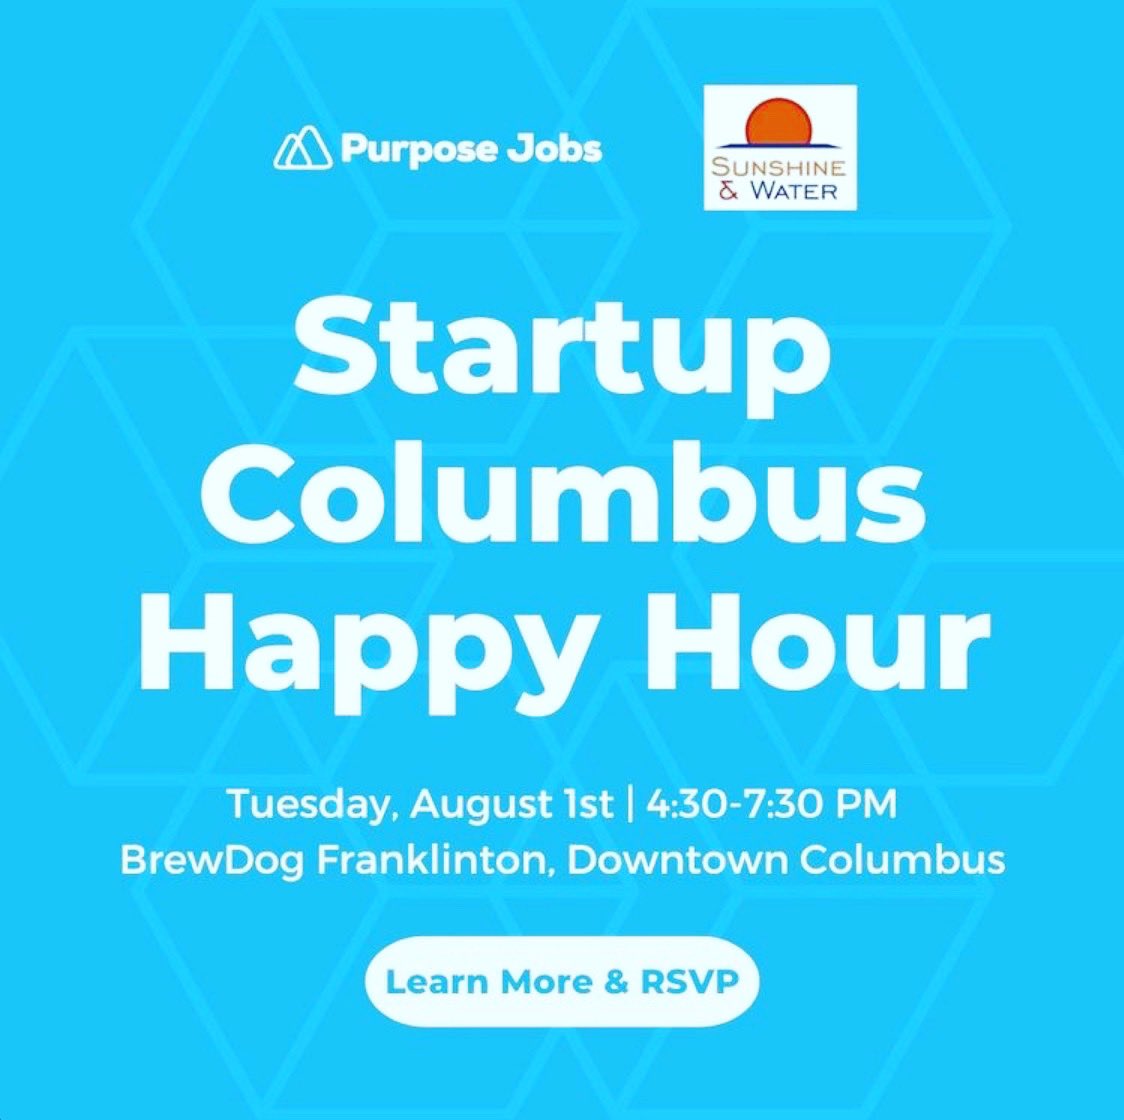 Join us and @Purpose_Jobs for the Startup Columbus Happy Hour! Mark your calendar for August 1st, 4:30 - 7:30 PM at BrewDog Franklinton and RSVP here 👇 purpose.jobs/startup-columb…